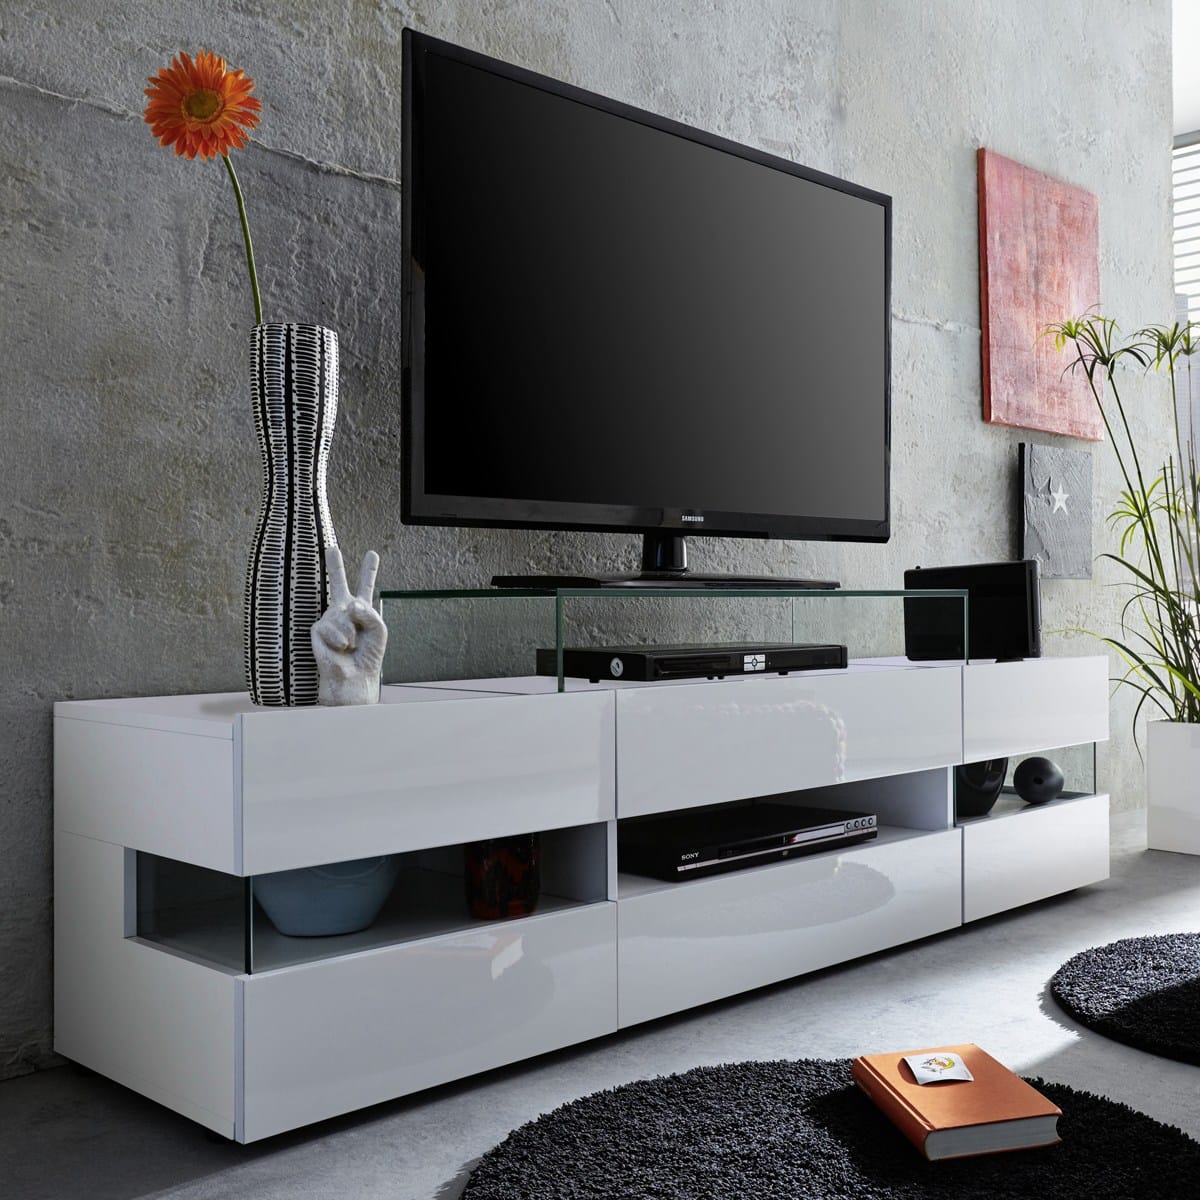 Are You Getting the Most Out of Your TV Stand?